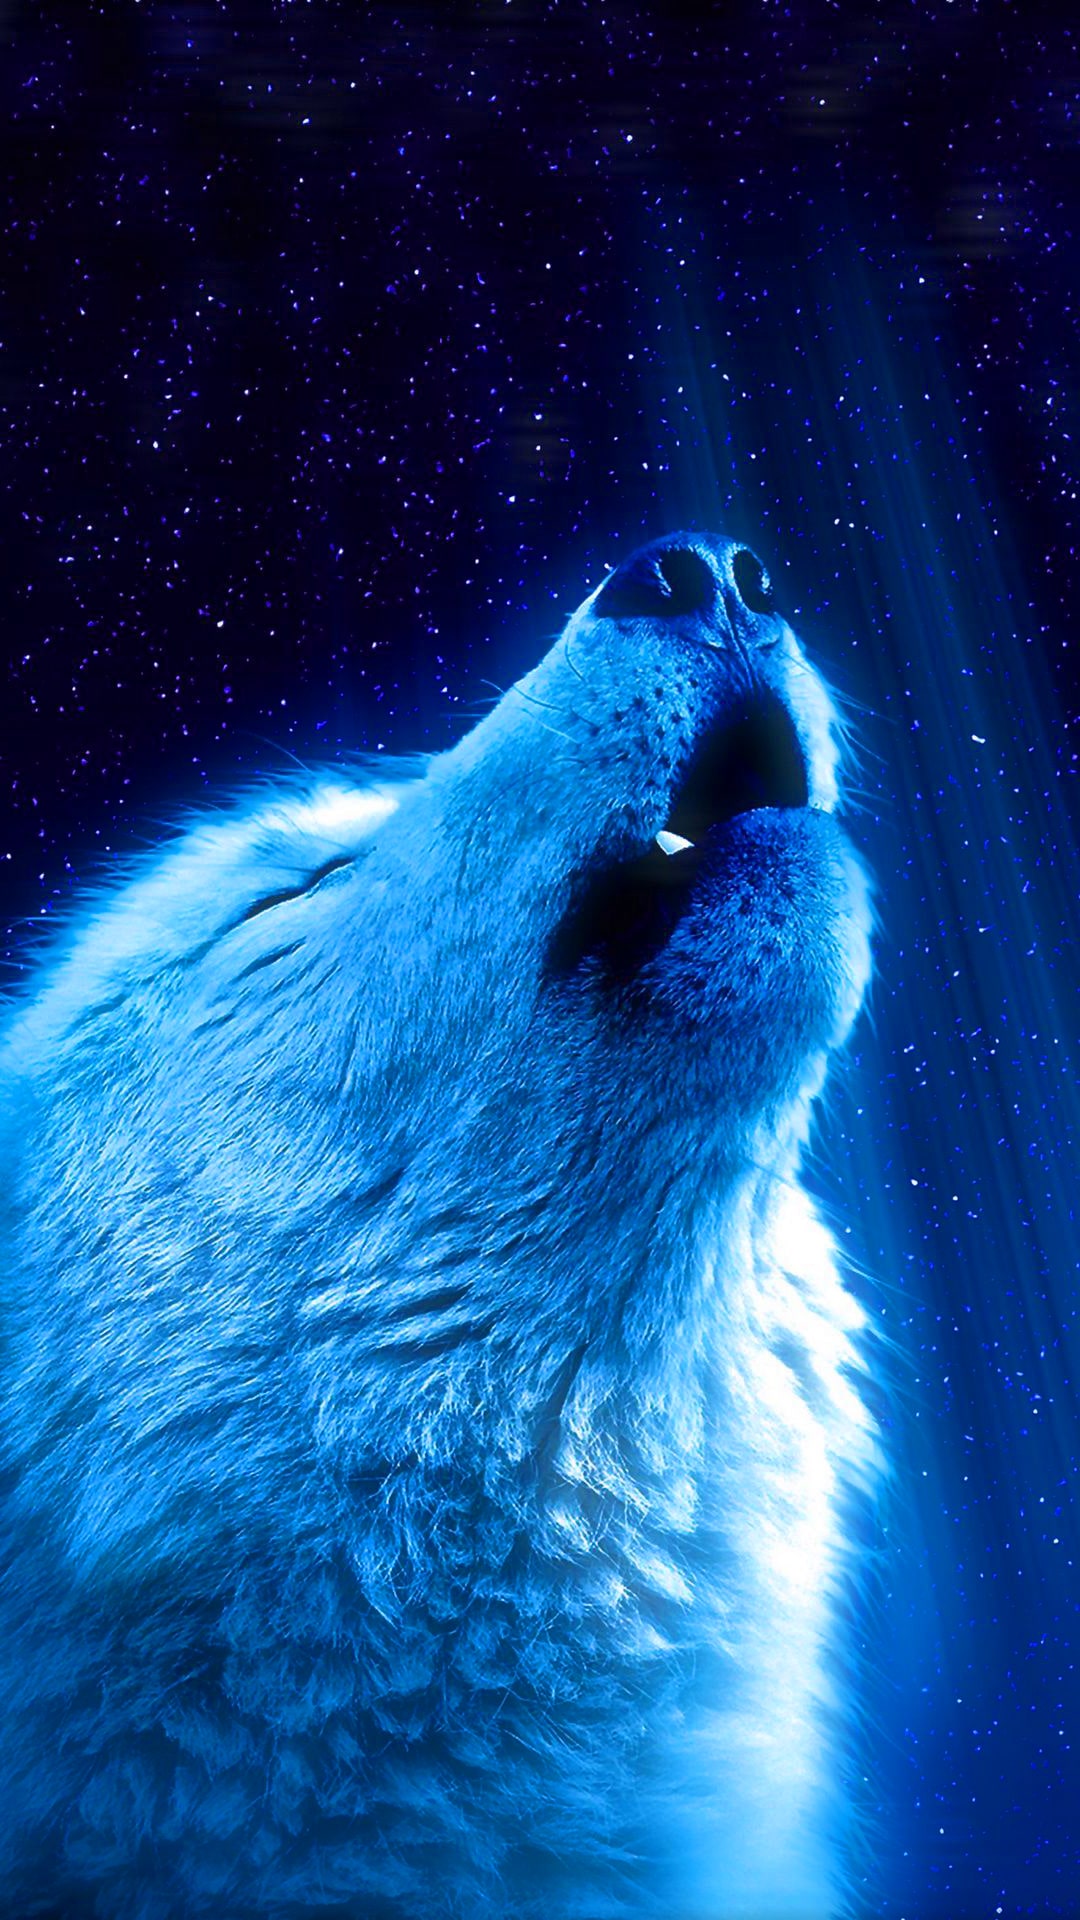 Cool Wolf Wallpaper - Kolpaper - Awesome Free Hd Wallpapers